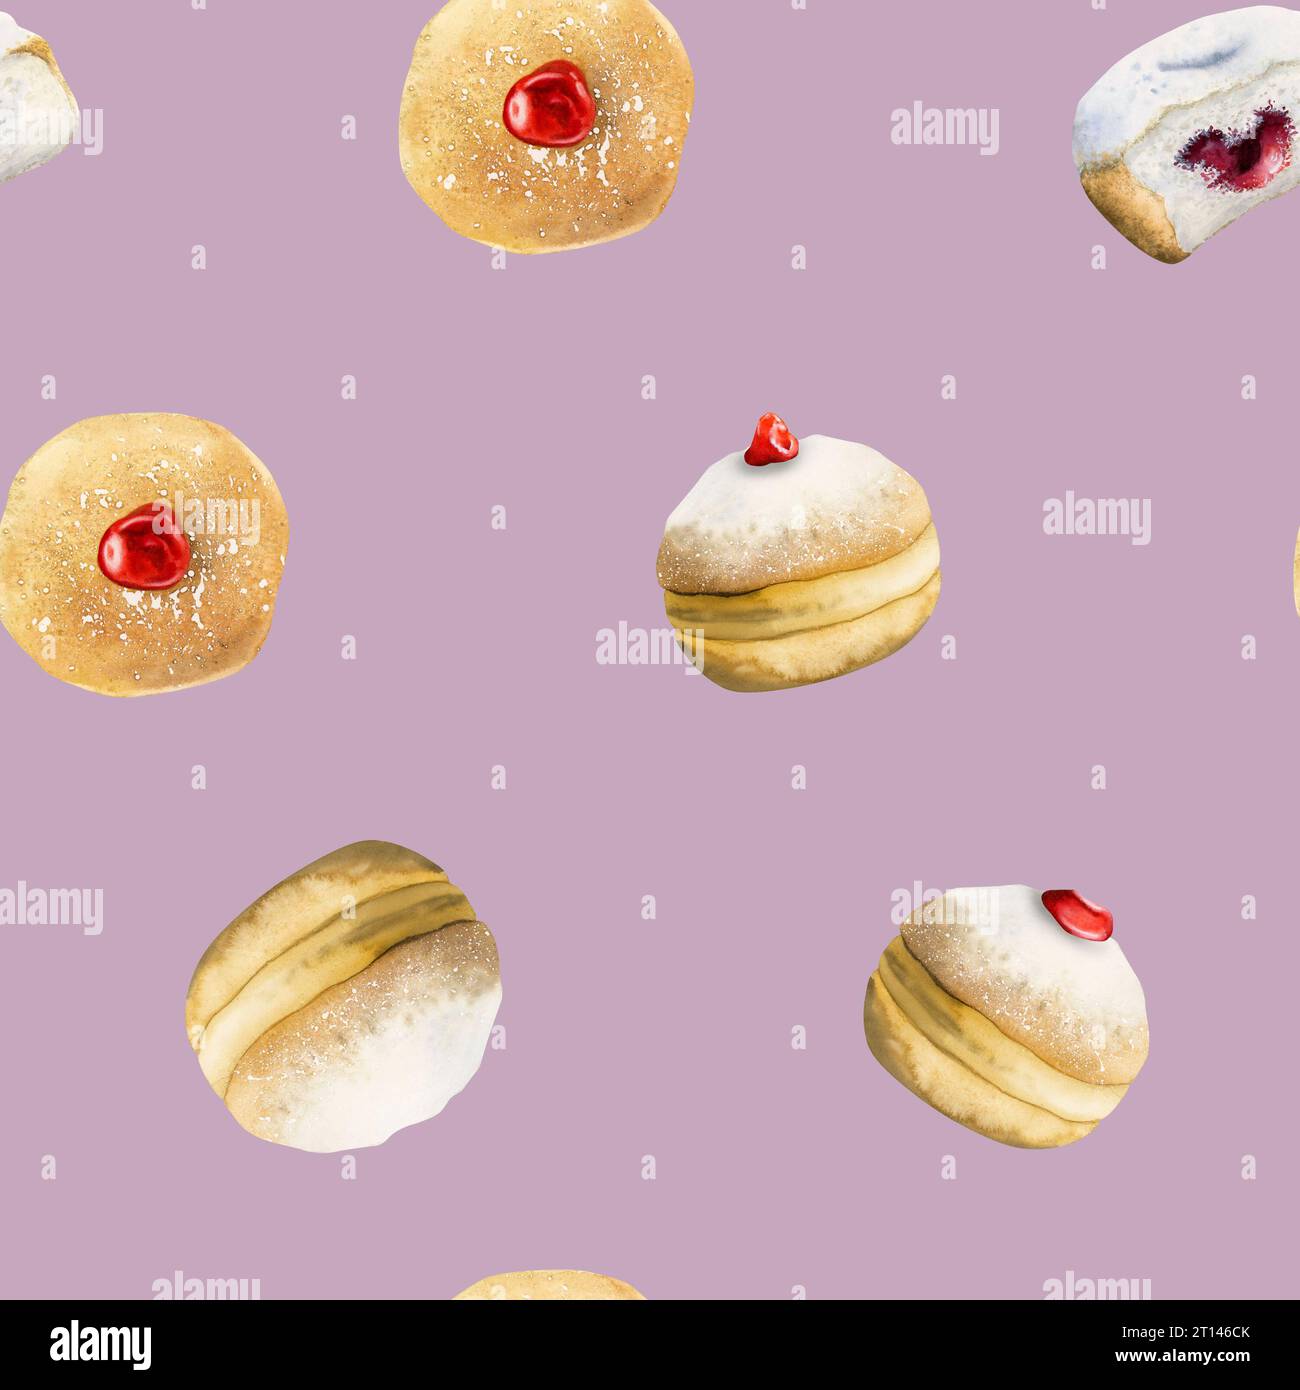 Delicious Hanukkah donuts watercolor seamless pattern of Jewish traditional holiday sweet dessert on dusty pink Stock Photo